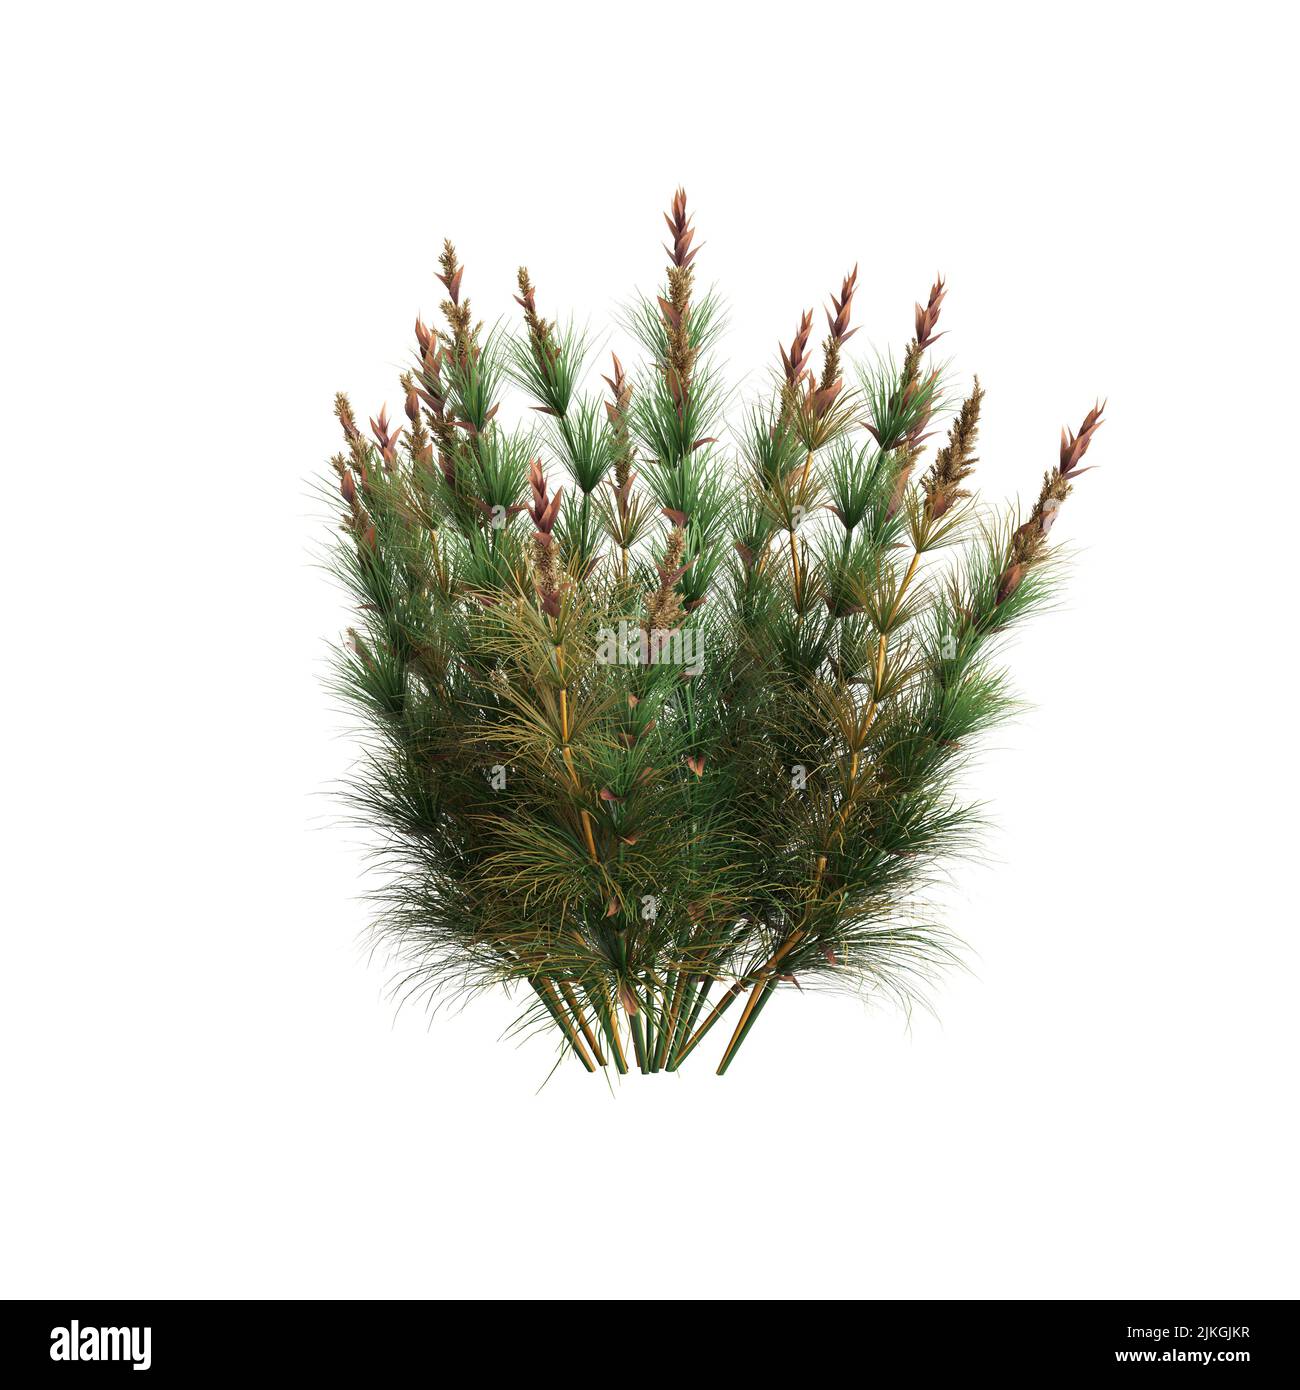 3d illustration of elegia capensis grass isolated on white background Stock Photo